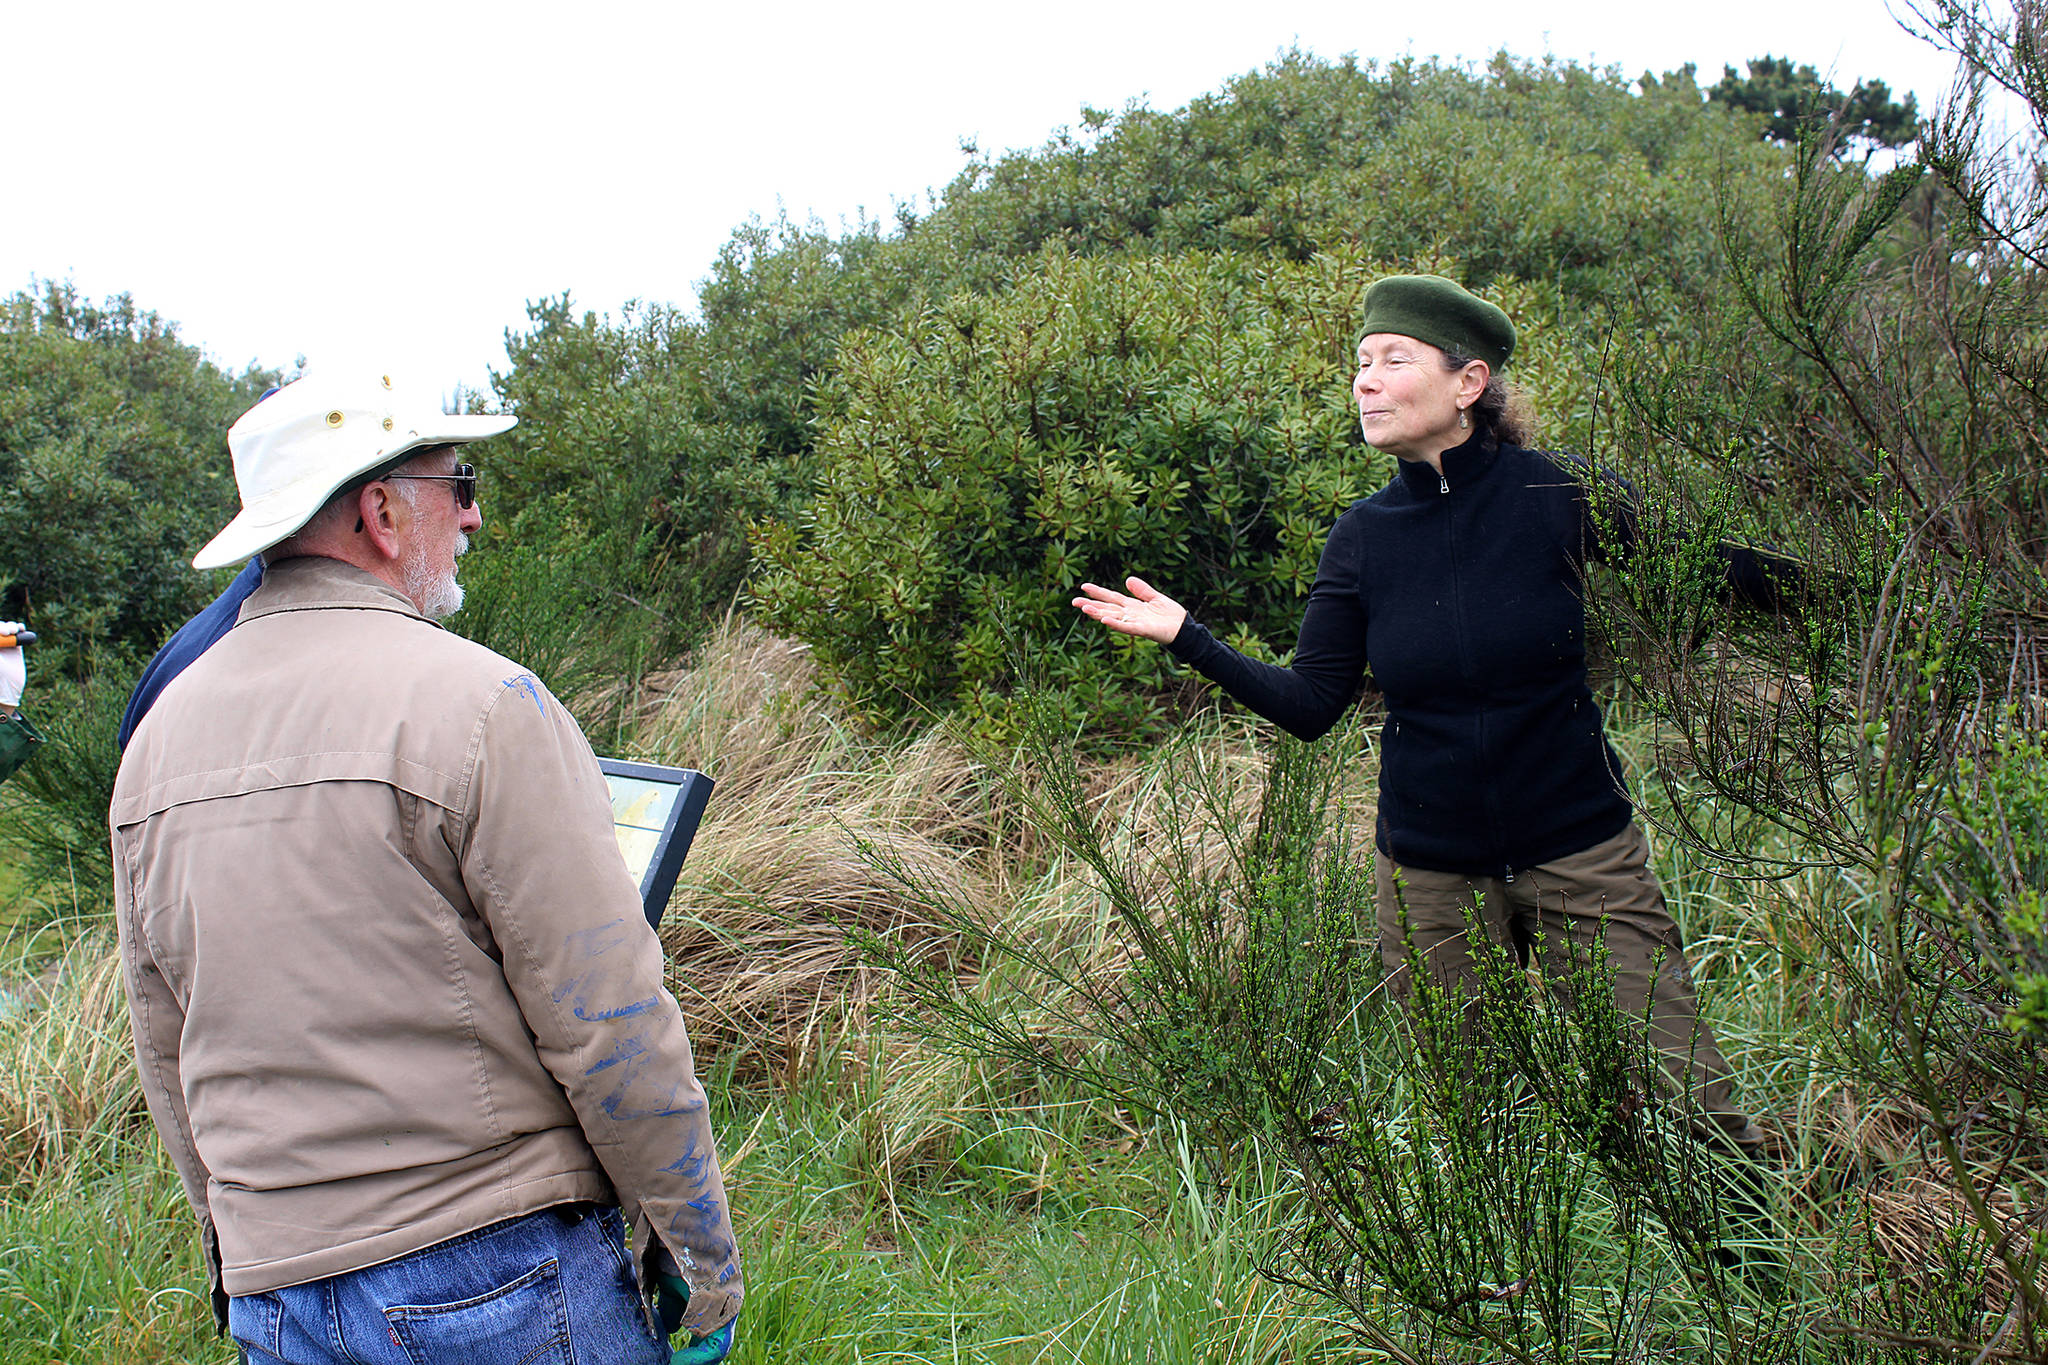 Effort to control Scotch Broom also spurs job growth